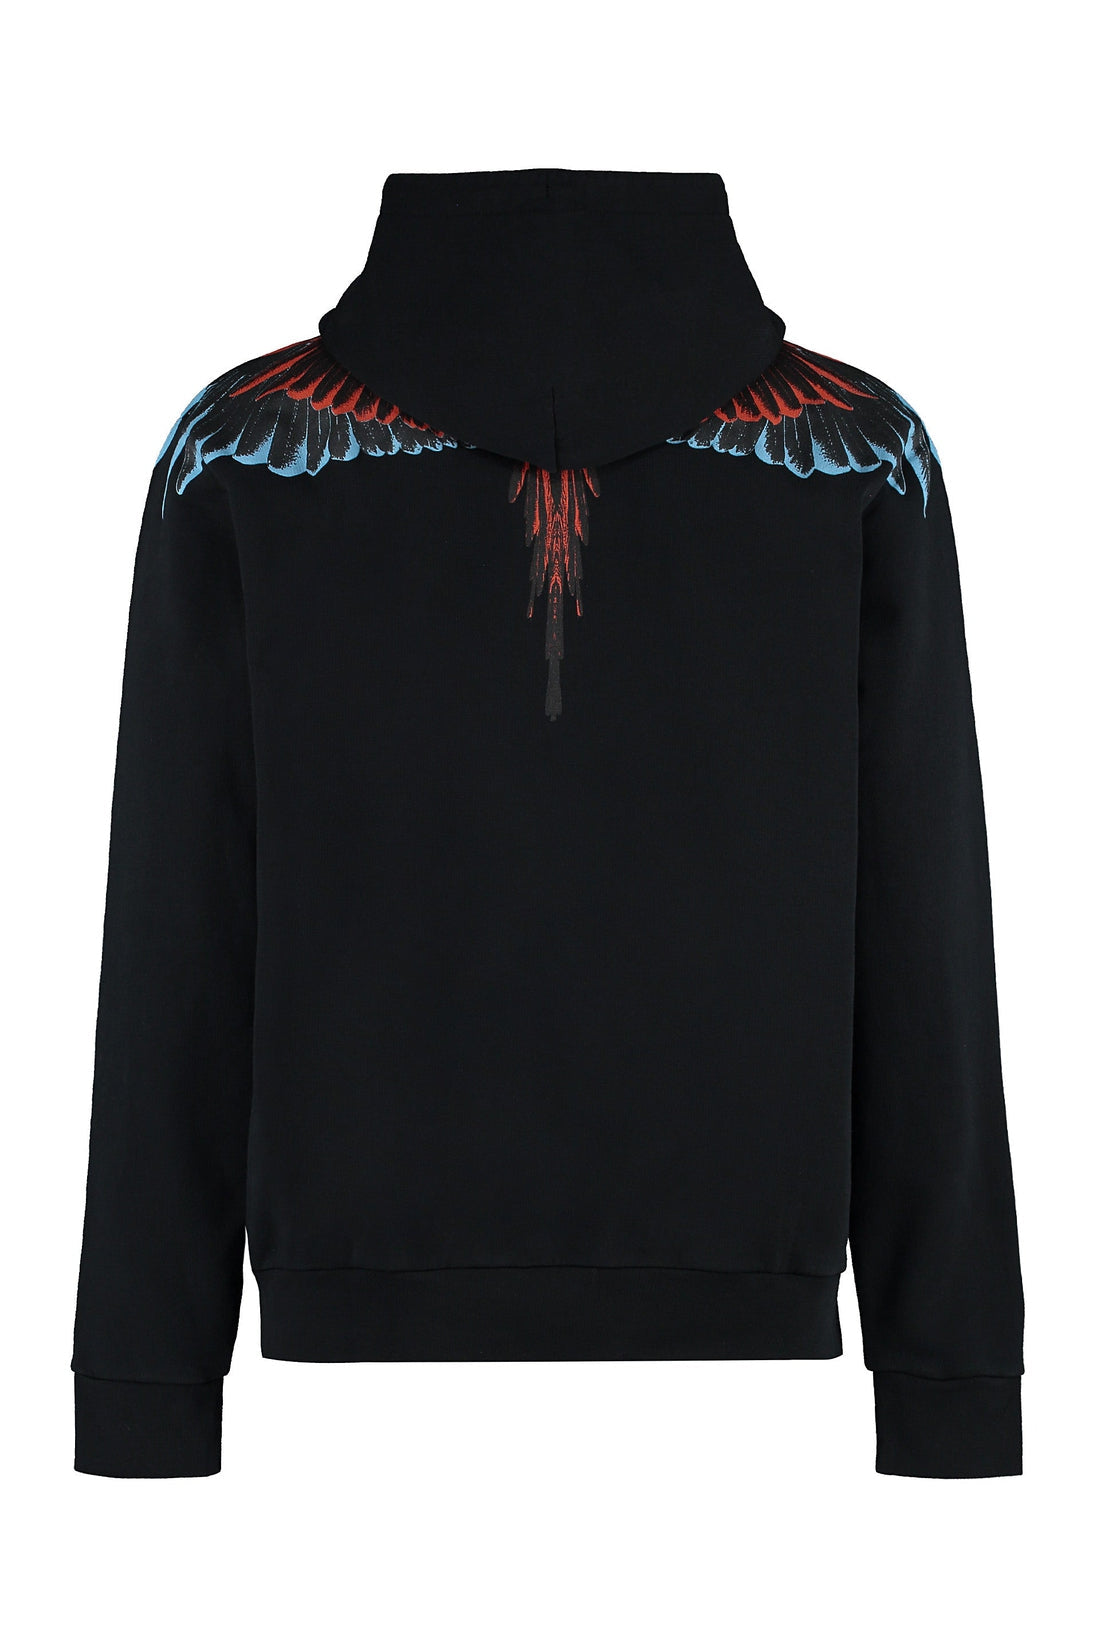 Marcelo Burlon County of Milan-OUTLET-SALE-Icon Wings printed hoodie-ARCHIVIST